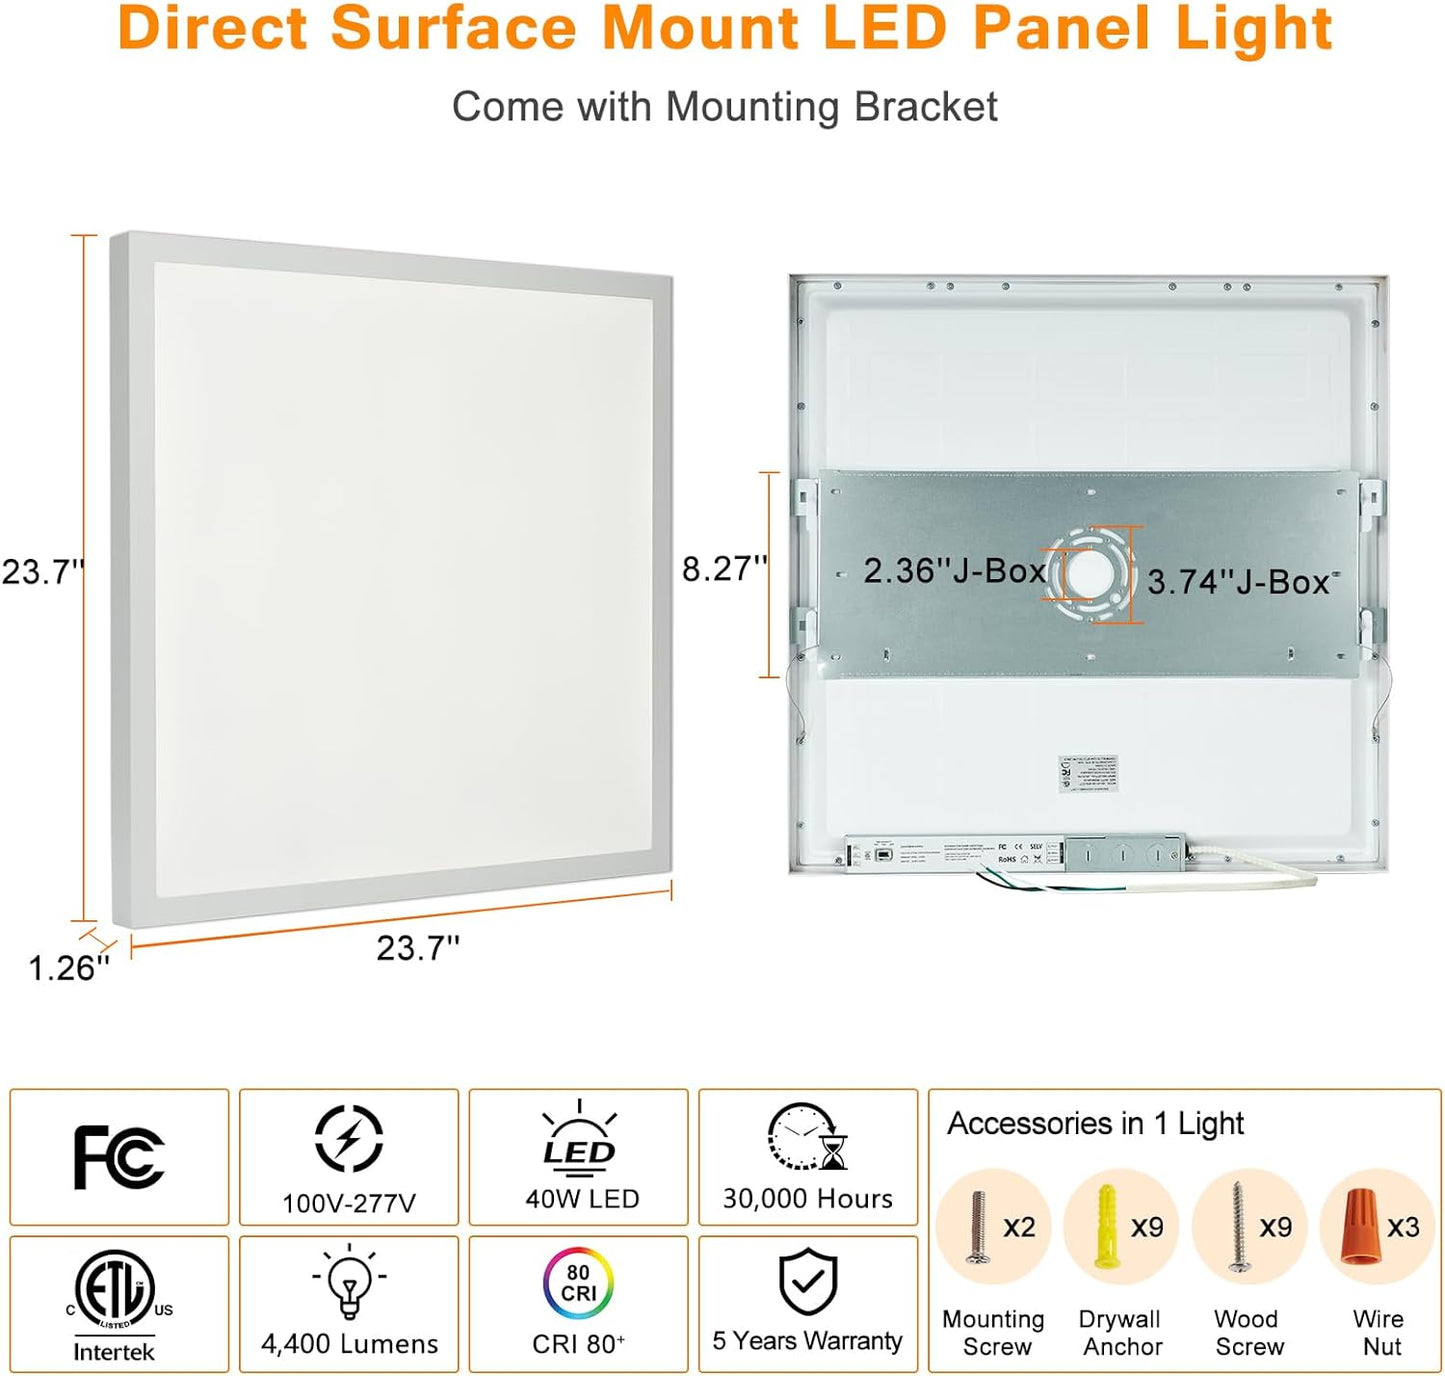 Mcacggo 2x2 FT LED Flat Panel Light Surface Mount Dimmable & 3000K/4000K/5000K in one - 40W 24x24 inch Backlit Flush Mount Ceiling Fixture, Bright 4400LM, 100-277V, ETL Listed, 4-Pack (Triac, 2x